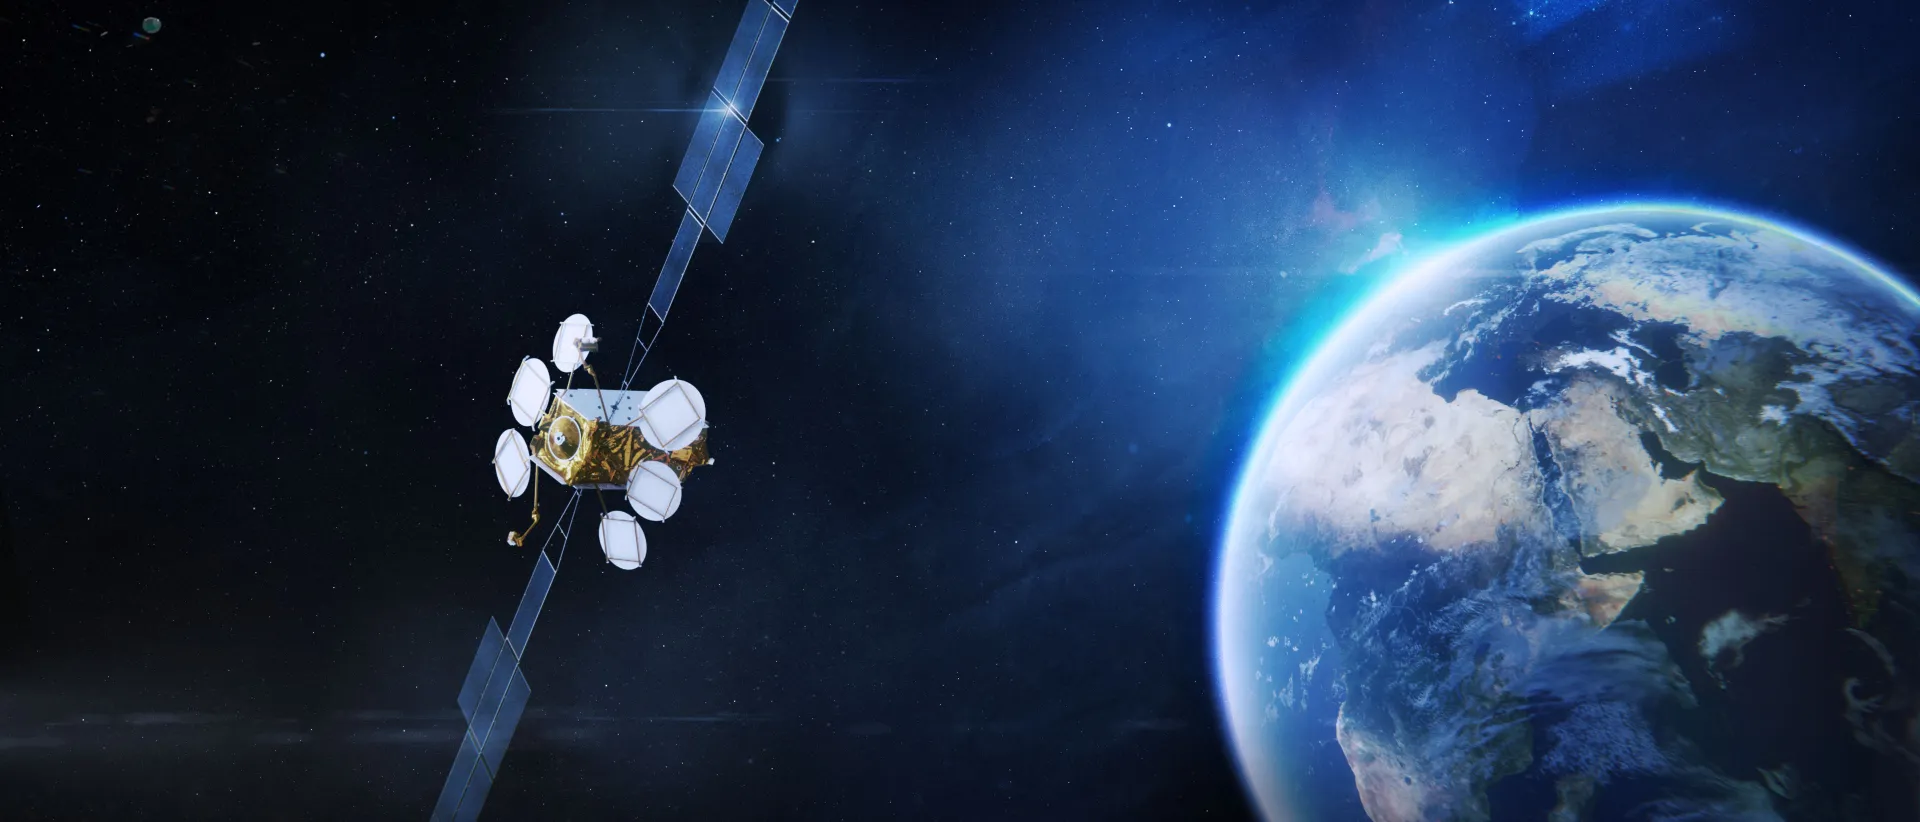 Beyond Gravity delivers receivers and converters for the commercial telecom satellite “Eutelsat 36D”. Copyright: Artist view (Airbus Defence & Space).